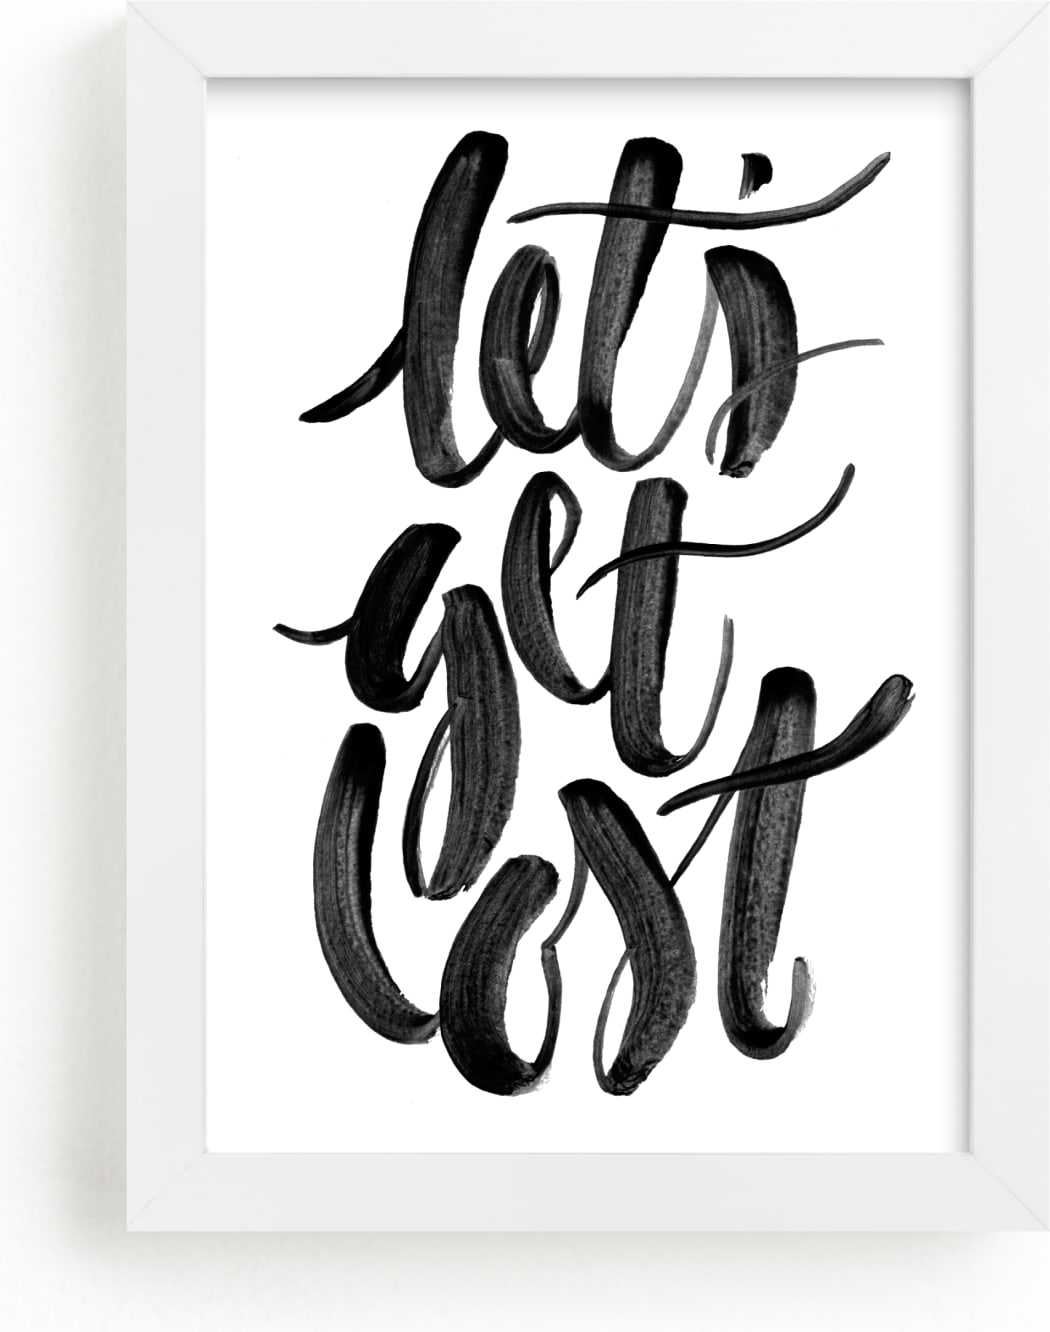 This is a black and white art by Sam Dubeau called Let's Get Lost.